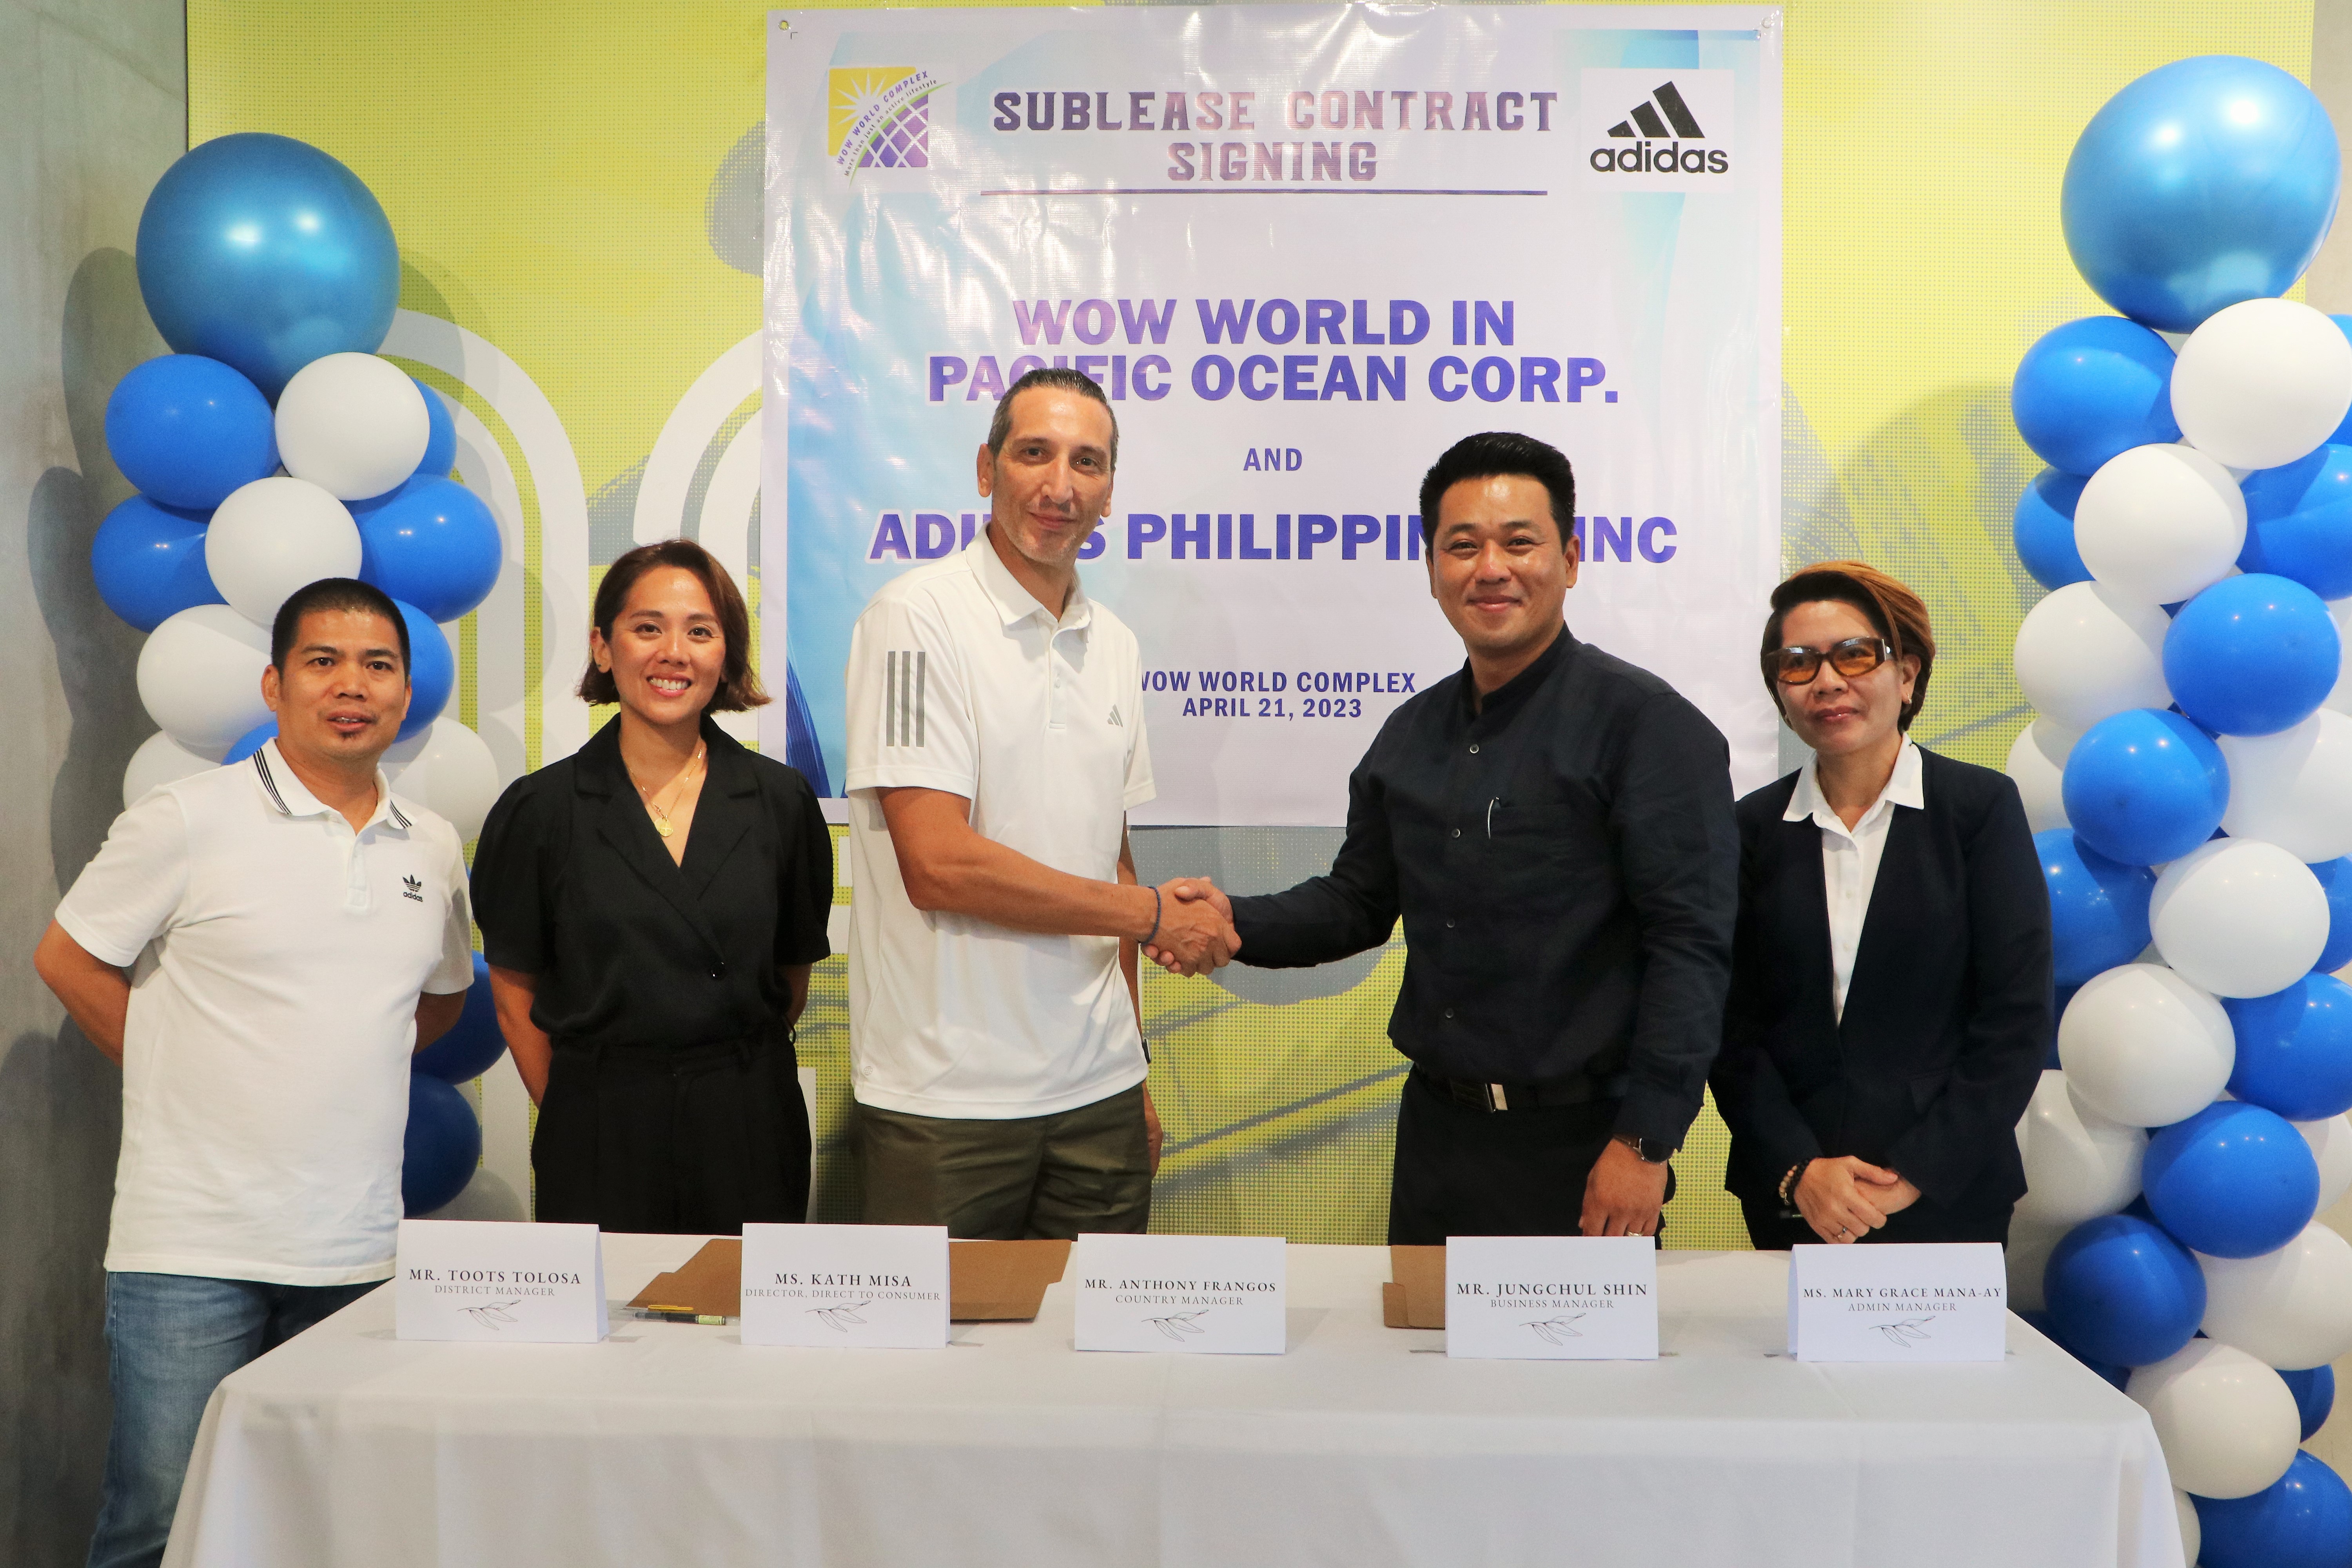 Adidas Philippines, Inc. country manager Anthony Frangos (3 rd  from L) seals the deal with a handshake with WOW World in Pacific Ocean Corp. business manager Jungchul Shin for another five years in the complex. Also in the picture (L-R) are Adidas district manager Toots Tolosa, Adidas director for direct to consumer Kath Misa, and WOW World in Pacific Ocean Corp. administrative manager Mary Grace Mana-ay (R).